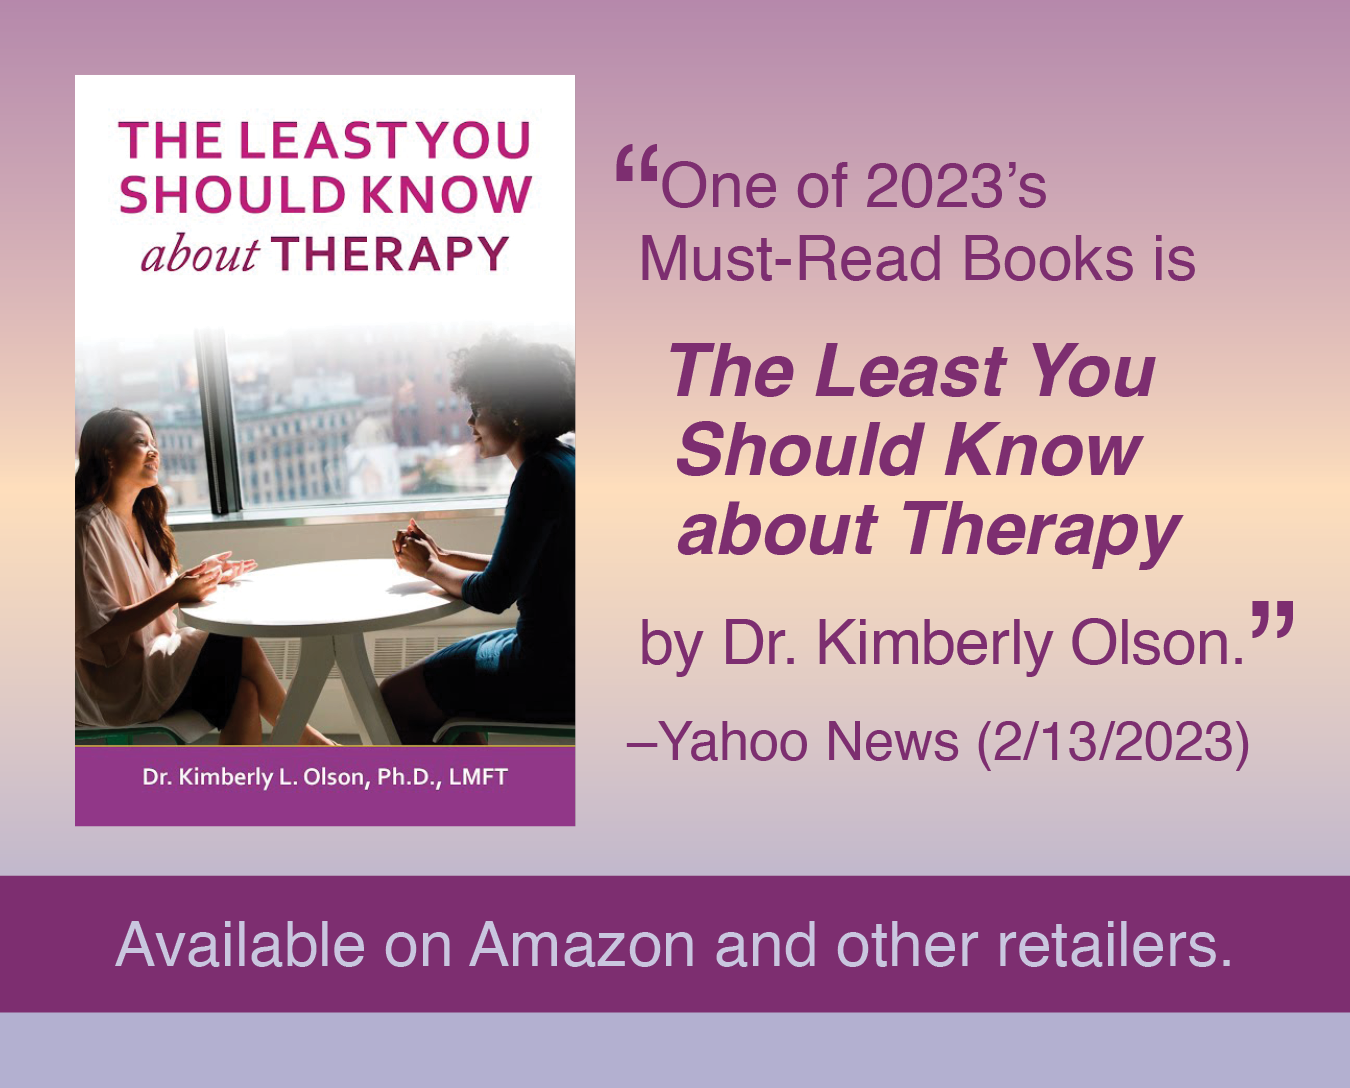 The Least You Should Know about Therapy by Dr. Kimberly Olson